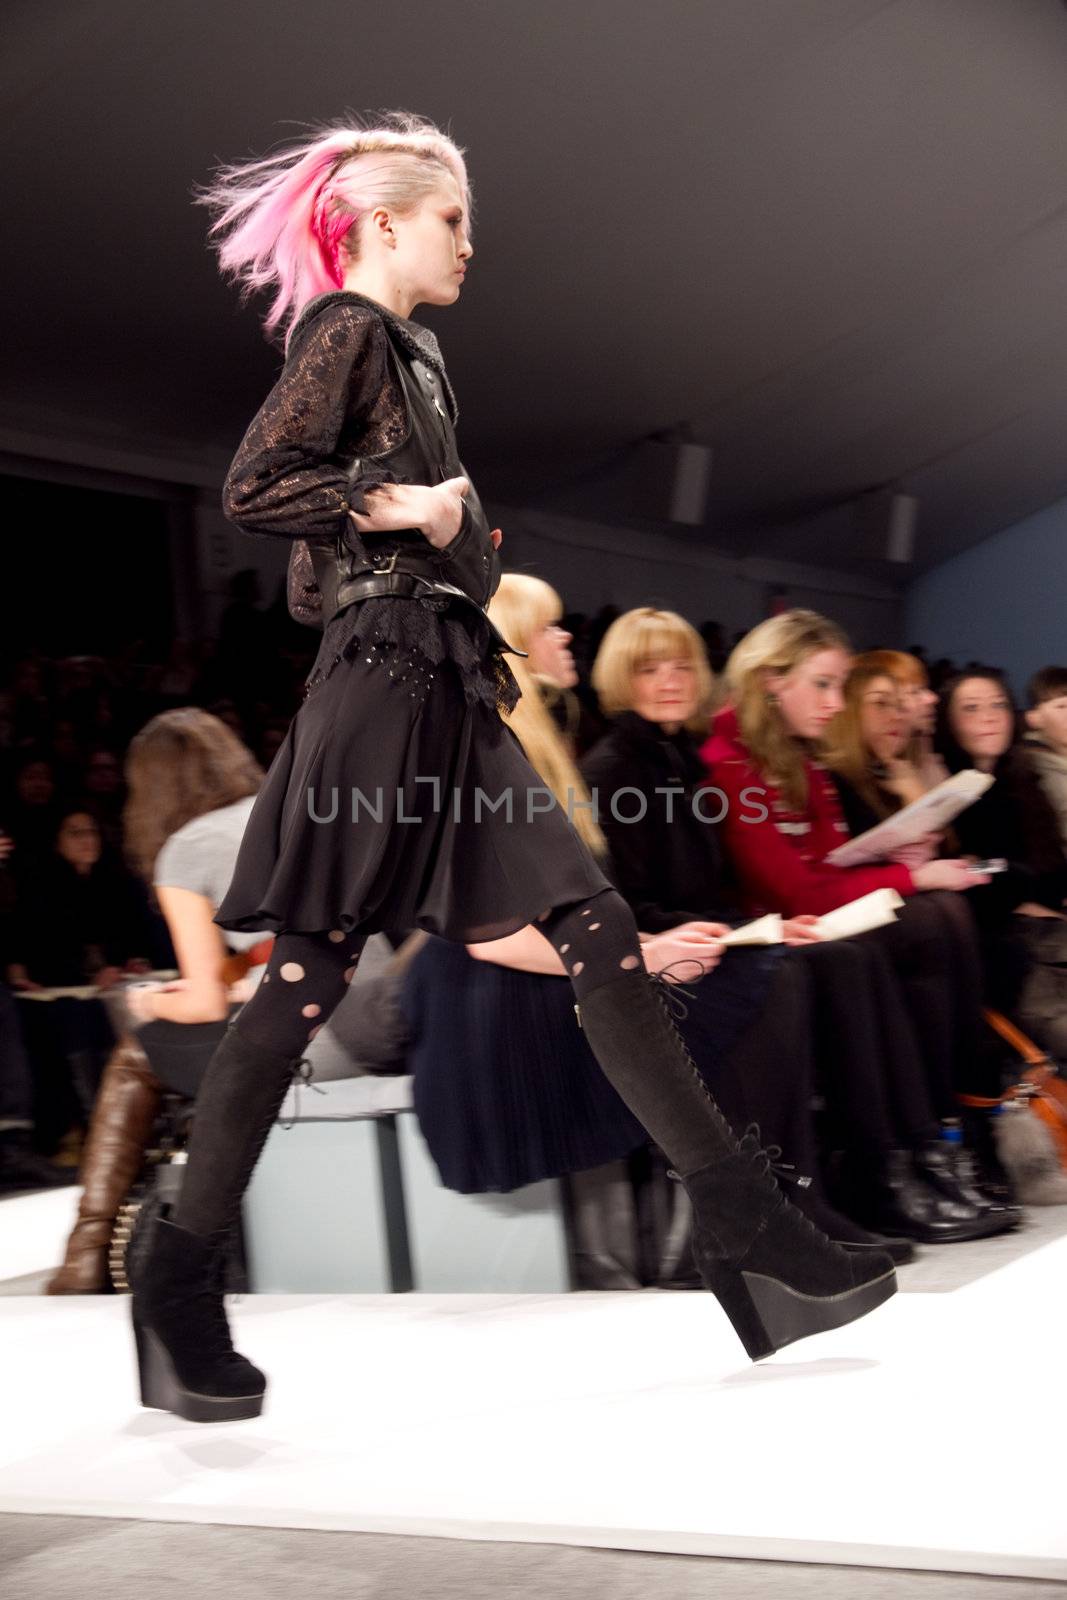 NEW YORK, NY - FEBRUARY 12: A model walks the runway at the Charlotte Ronson Fall 2011 fashion show during Mercedes-Benz Fashion Week at Lincoln Center on February 12, 2011 in New York City. (Photo by Diana Beato)